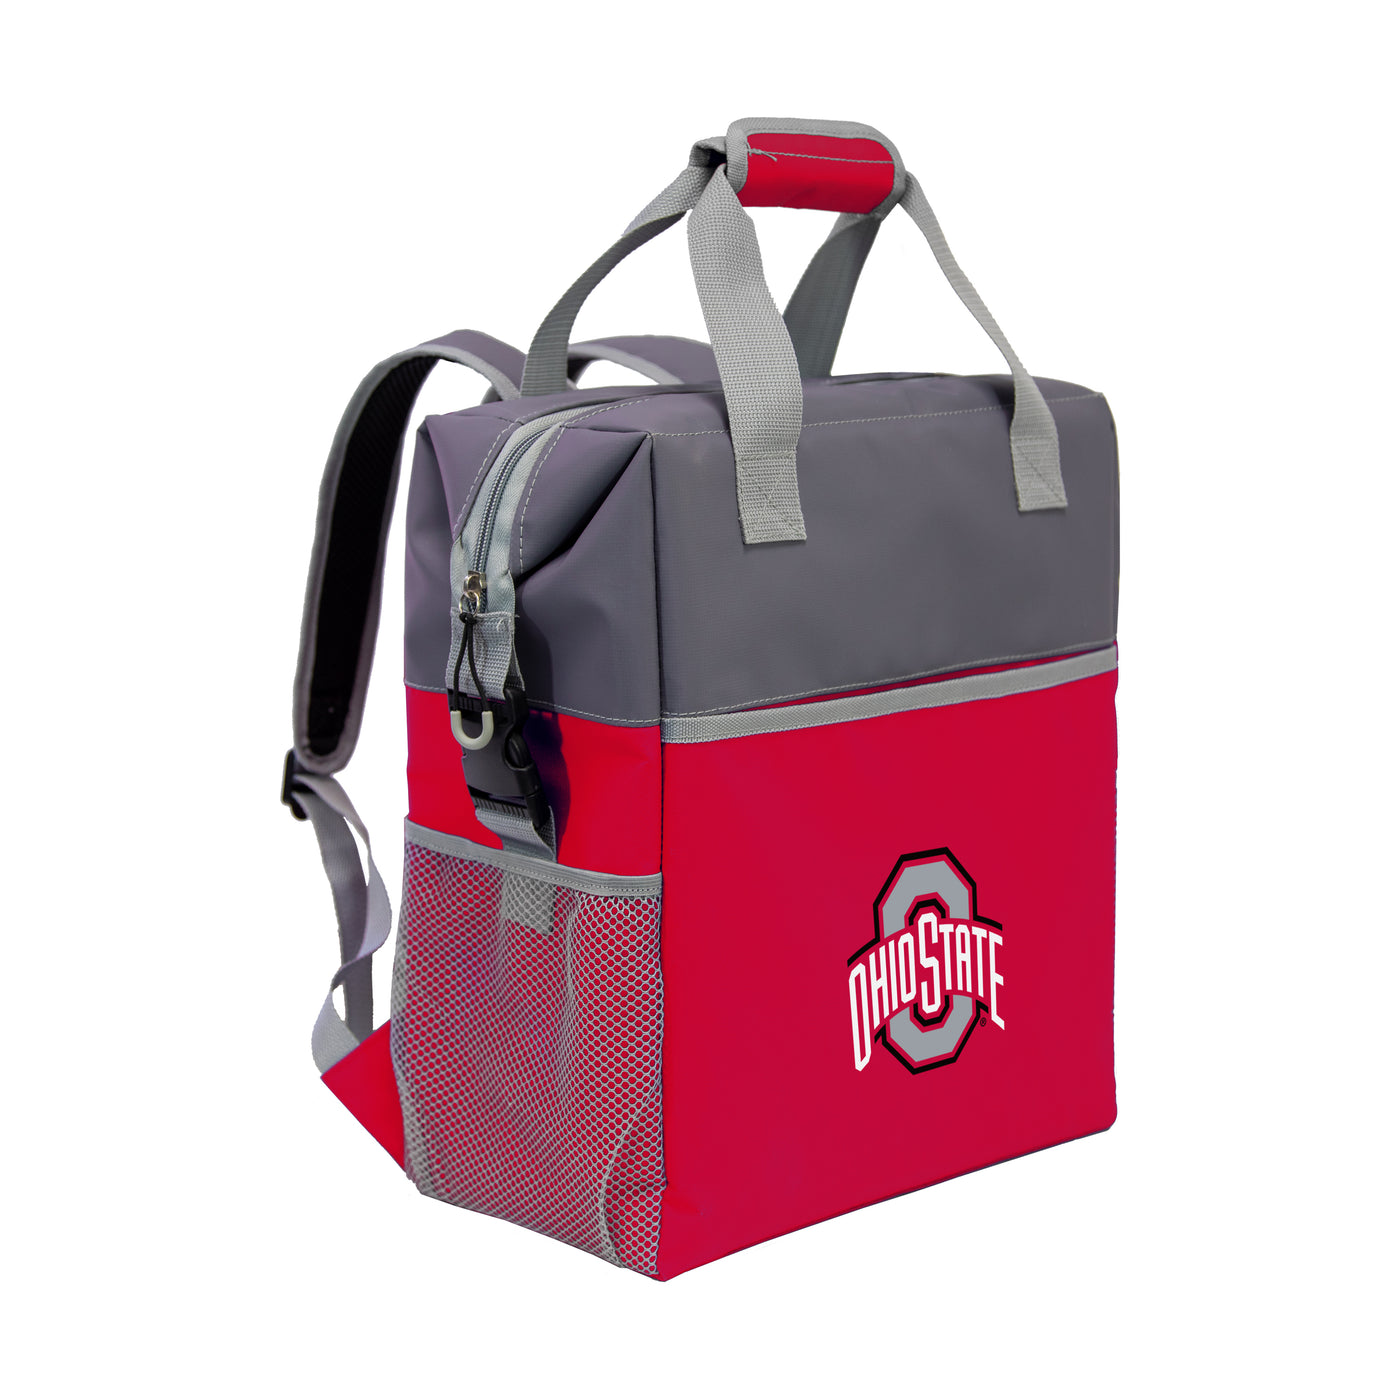 Ohio State Backpack Cooler